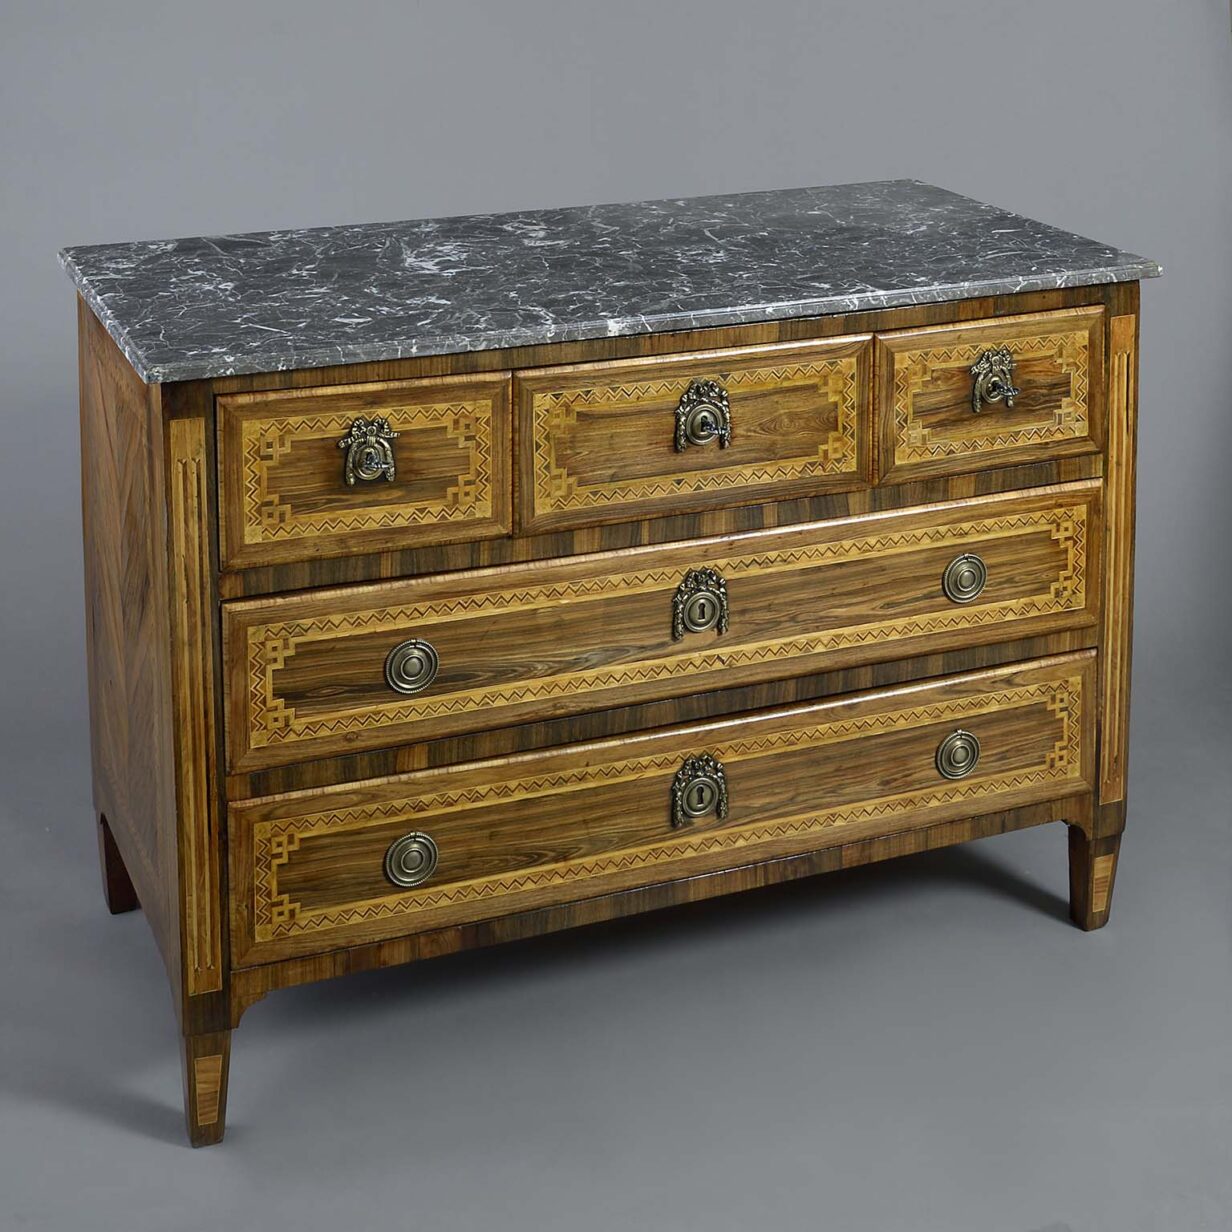 Late 18th century parquetry commode